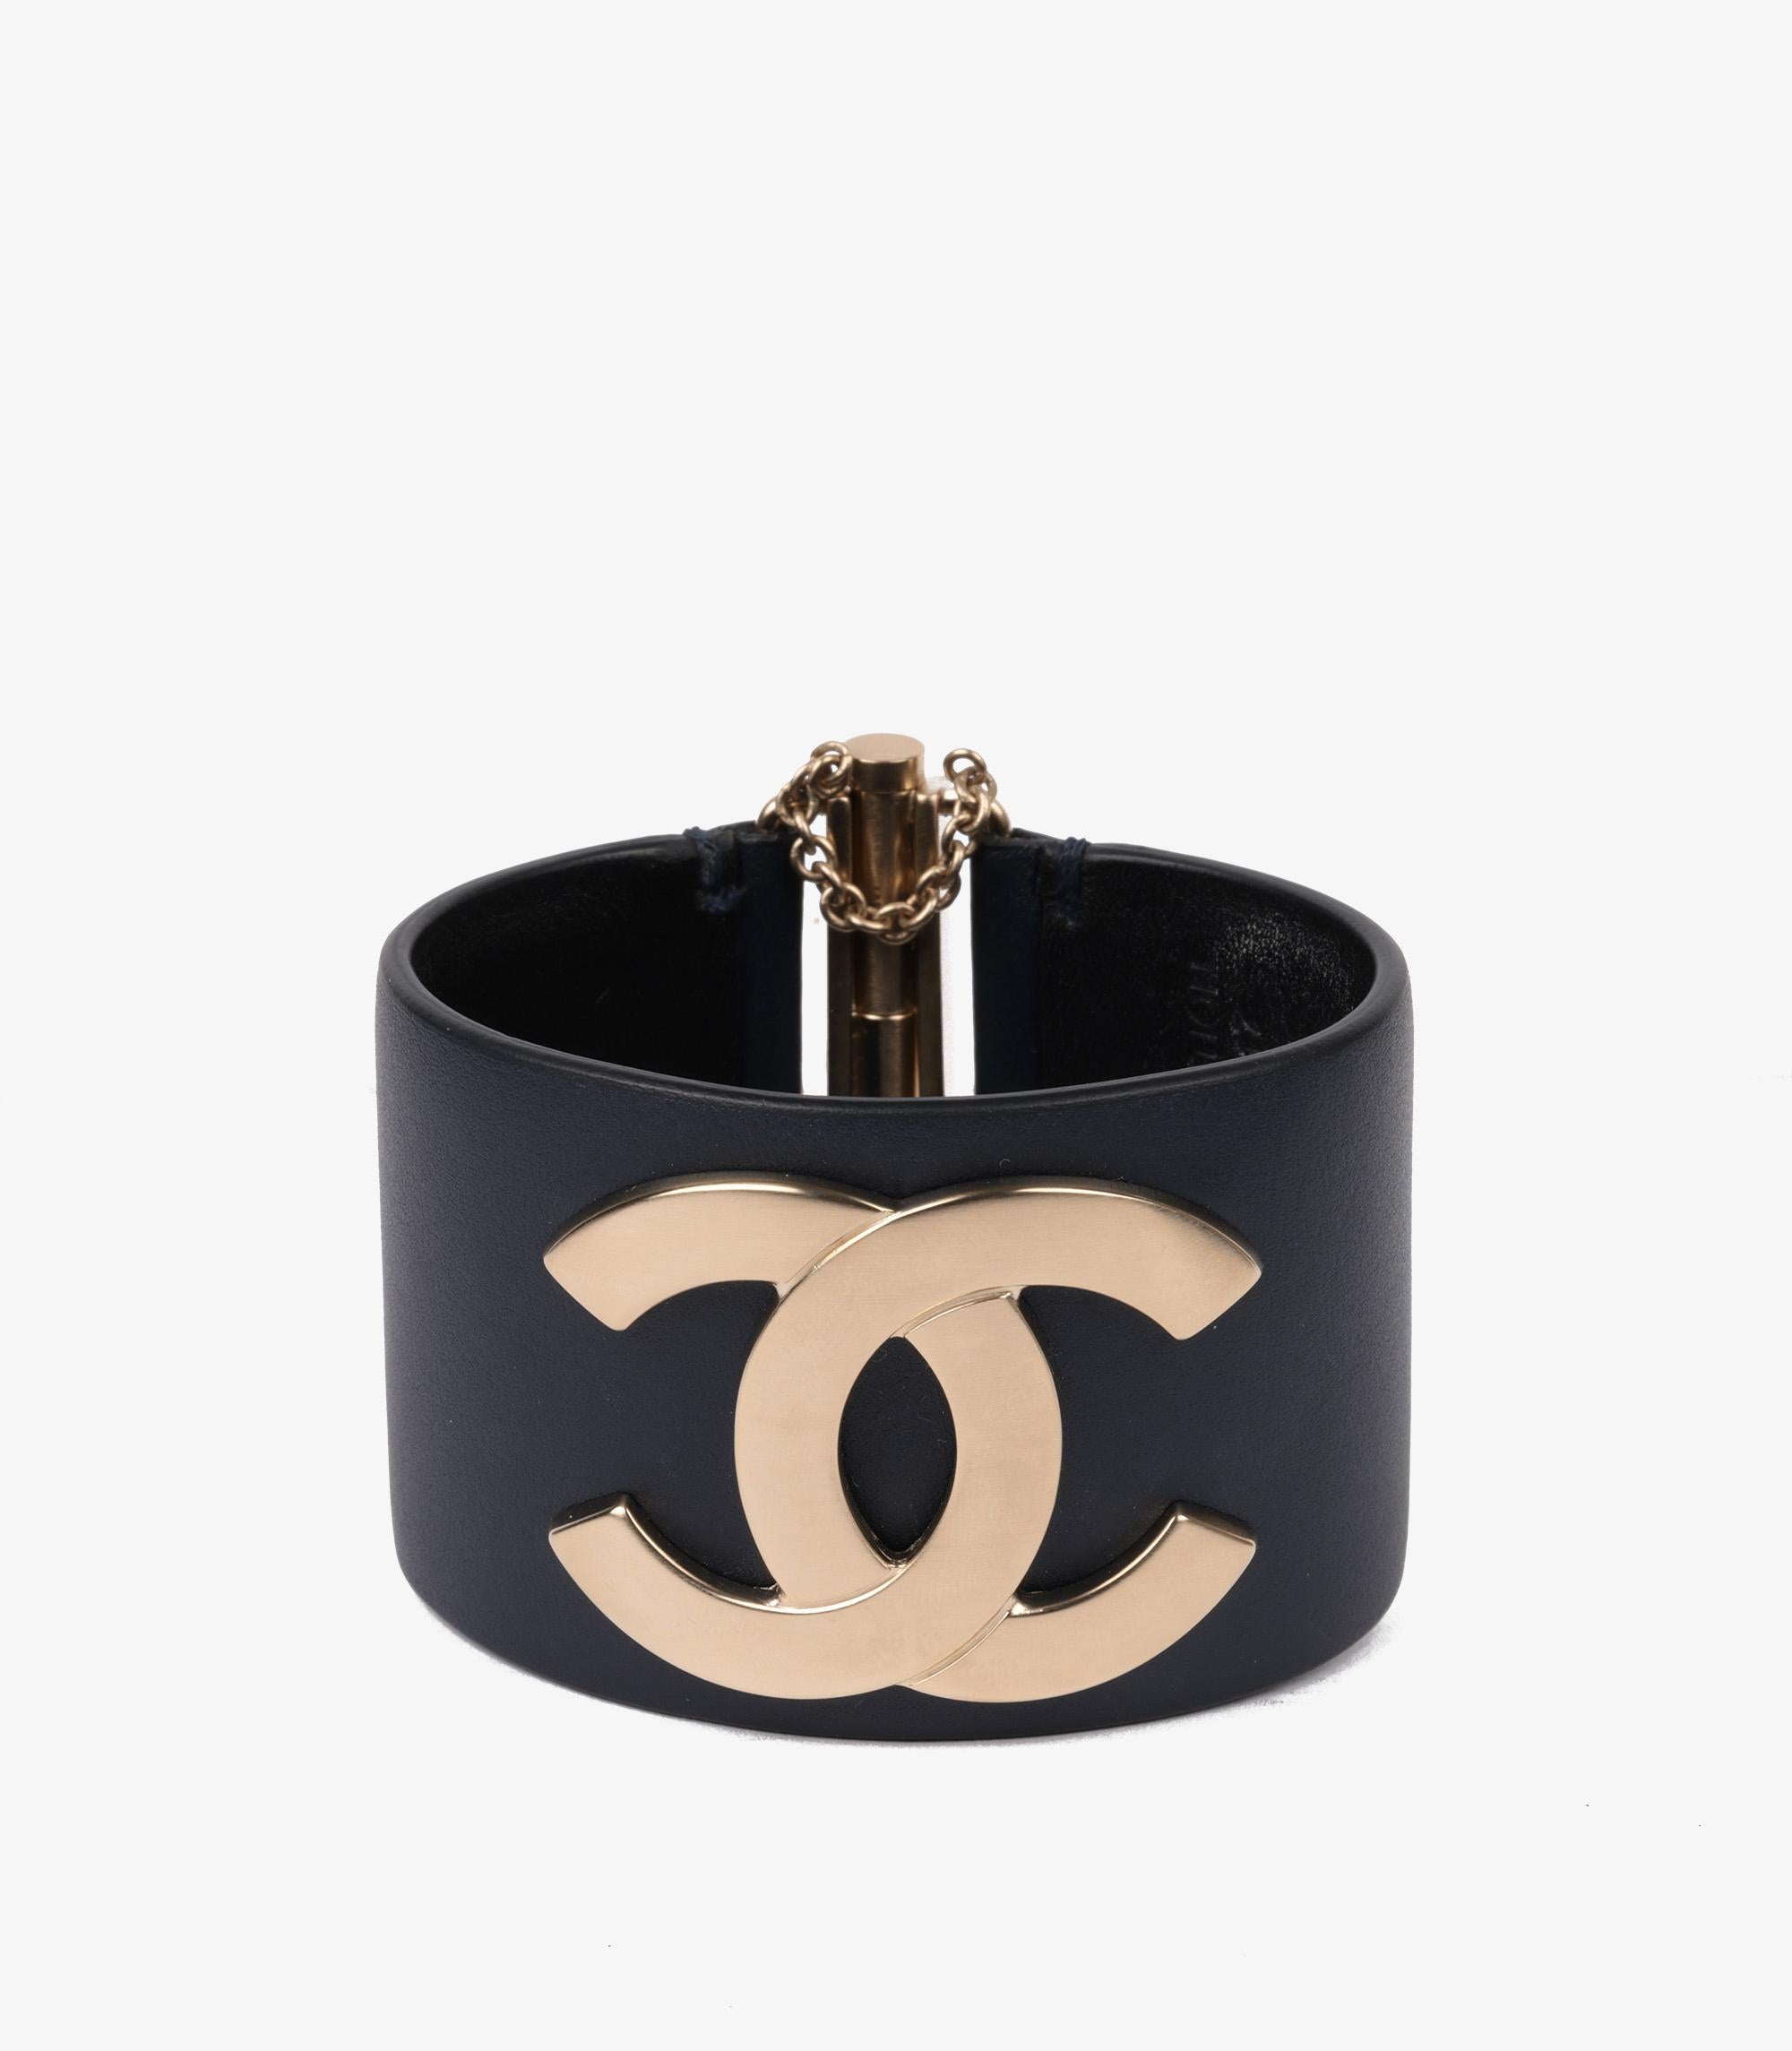 Chanel Gold Tone Navy Lambskin Leather CC Bracelet

Brand- Chanel
Model- Leather CC Bracelet
Product Type- Bracelet
Serial Number- 20**
Accompanied By- Chanel Box
Material(s)- Gold Tone Metal

Gemstone Quantity- 58.6g
Bracelet Length-